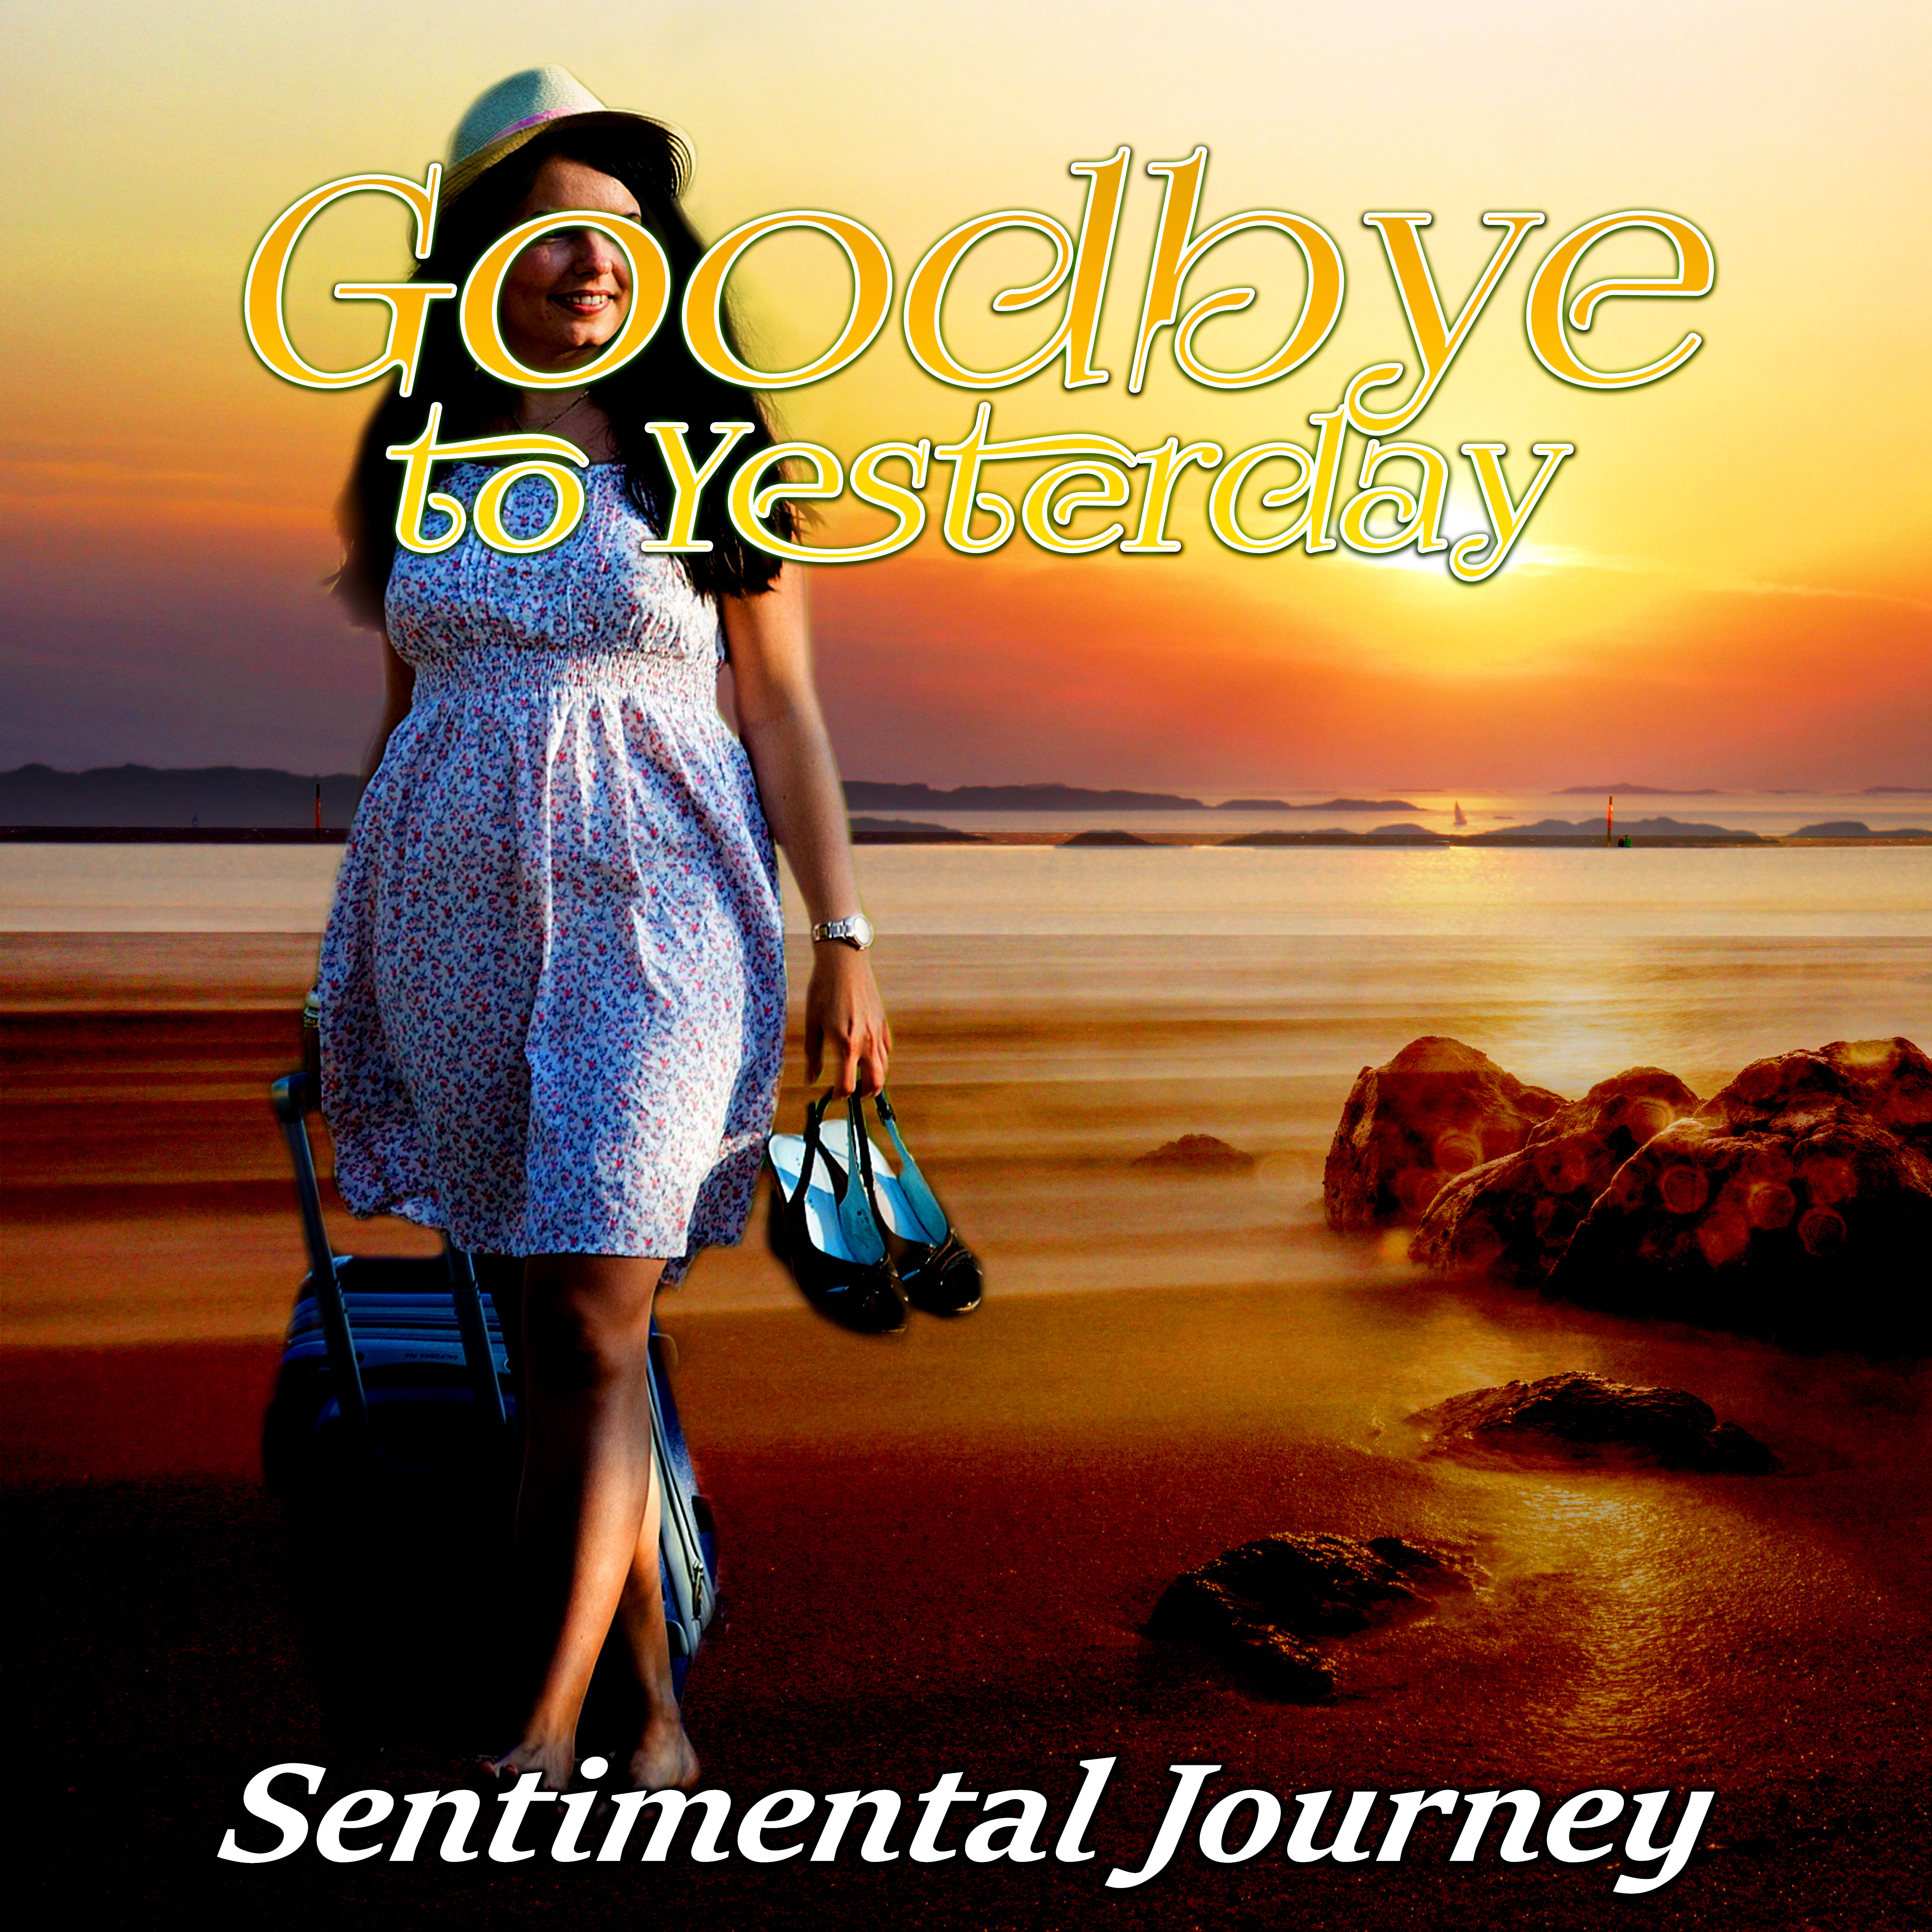 Goodbye to Yesterday - Piano Instrumental Music for Relaxation, Sentimental Journey, Just Relax, Lounge Music, Cool Jazz, Piano Bar Music, Chill Out